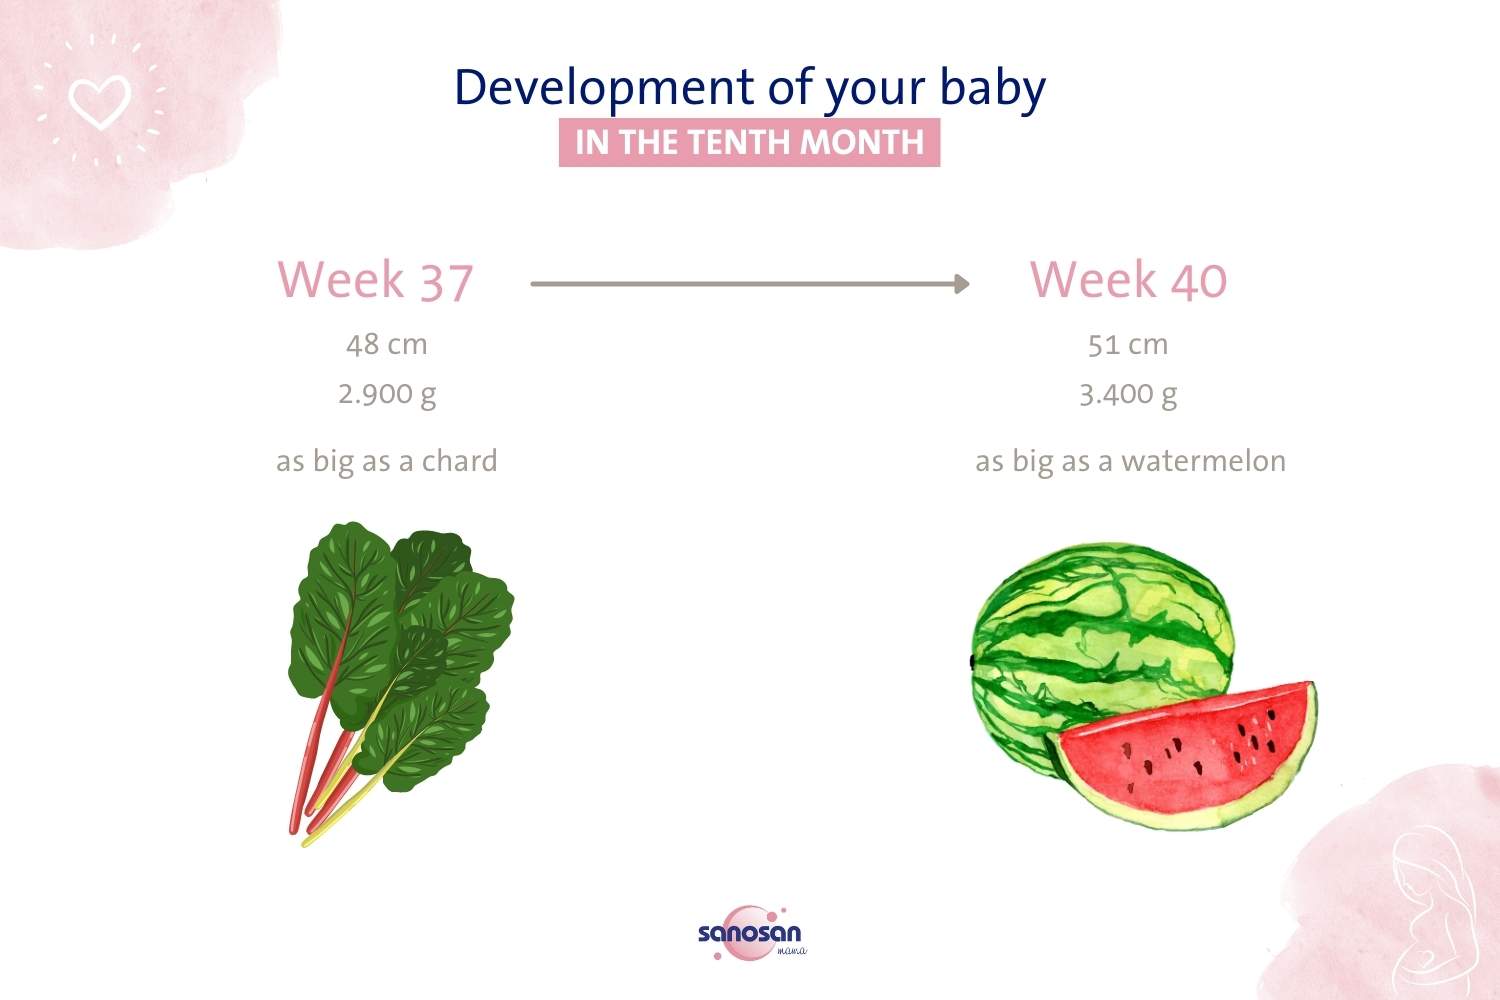 infografic on the development of the baby in the tenth month